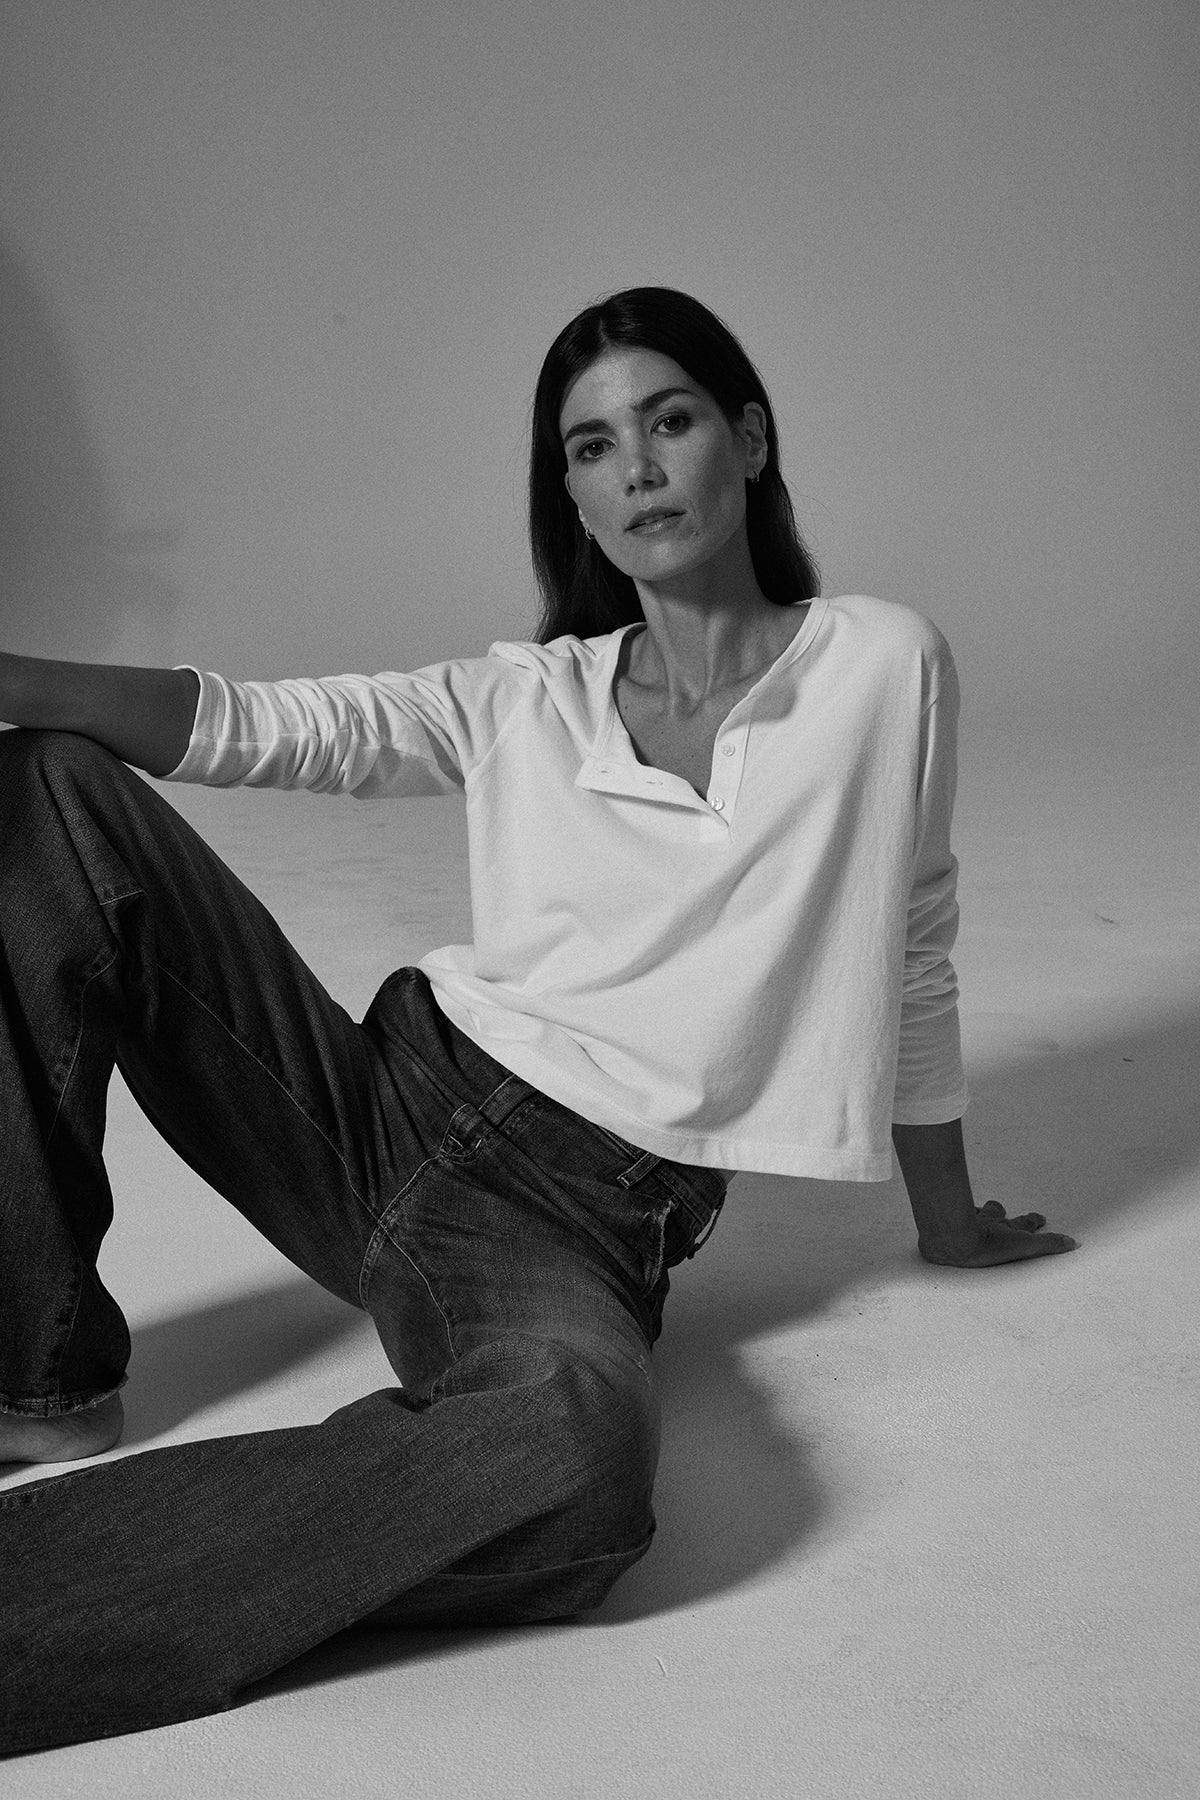   A woman sitting on the floor in DELIAH CROPPED HENLEY jeans made of sueded jersey cotton, along with a white shirt from Velvet by Graham & Spencer, featuring a cropped silhouette. 